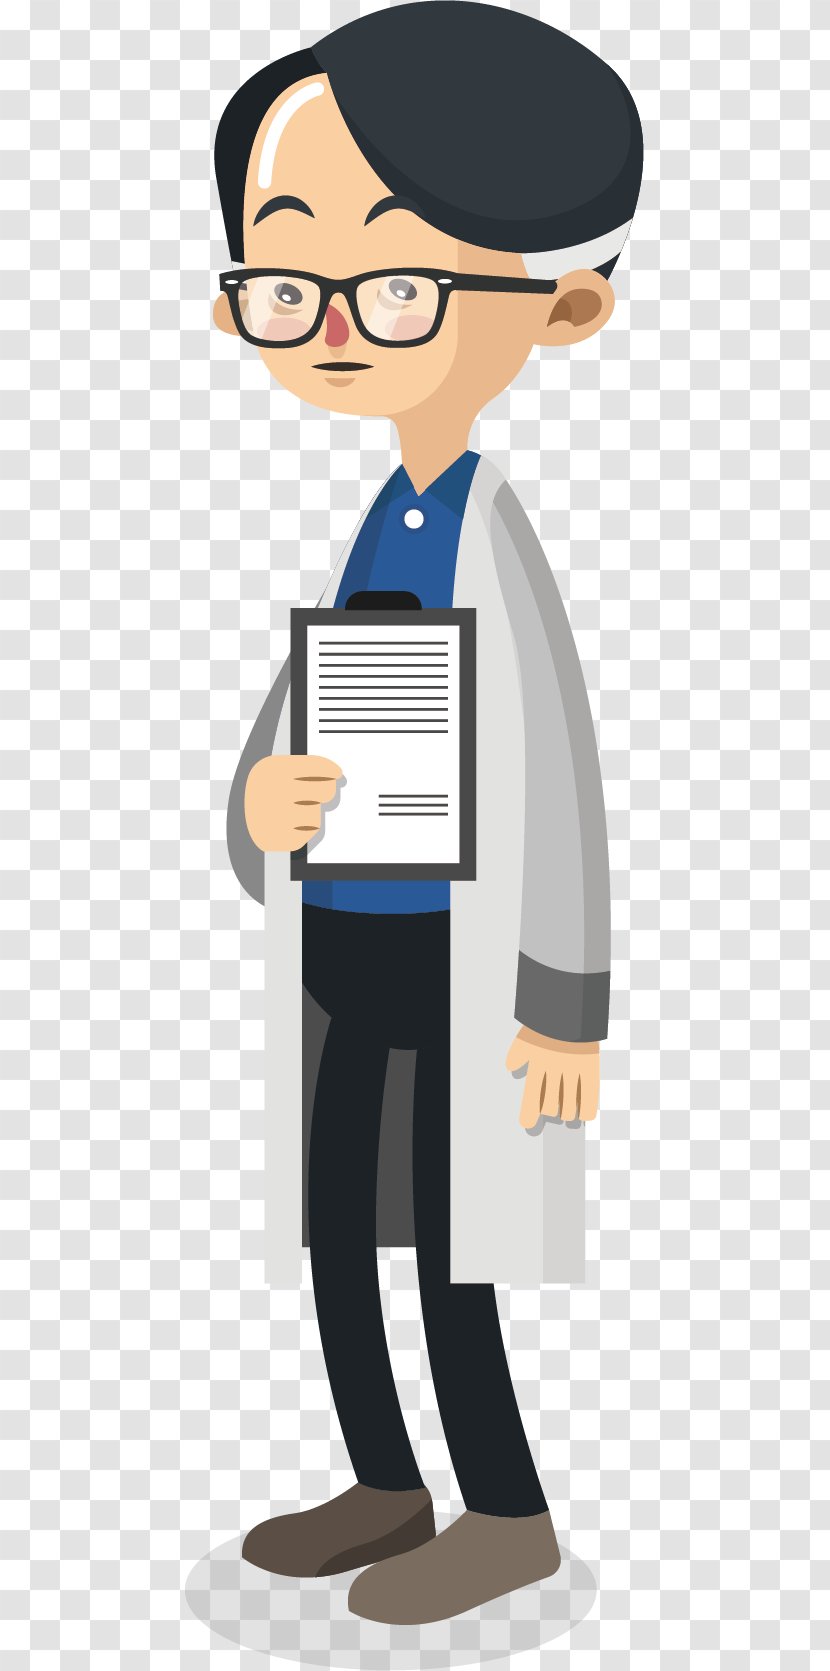 First Aid Physician - Medicine - Cartoon Male Doctor Transparent PNG